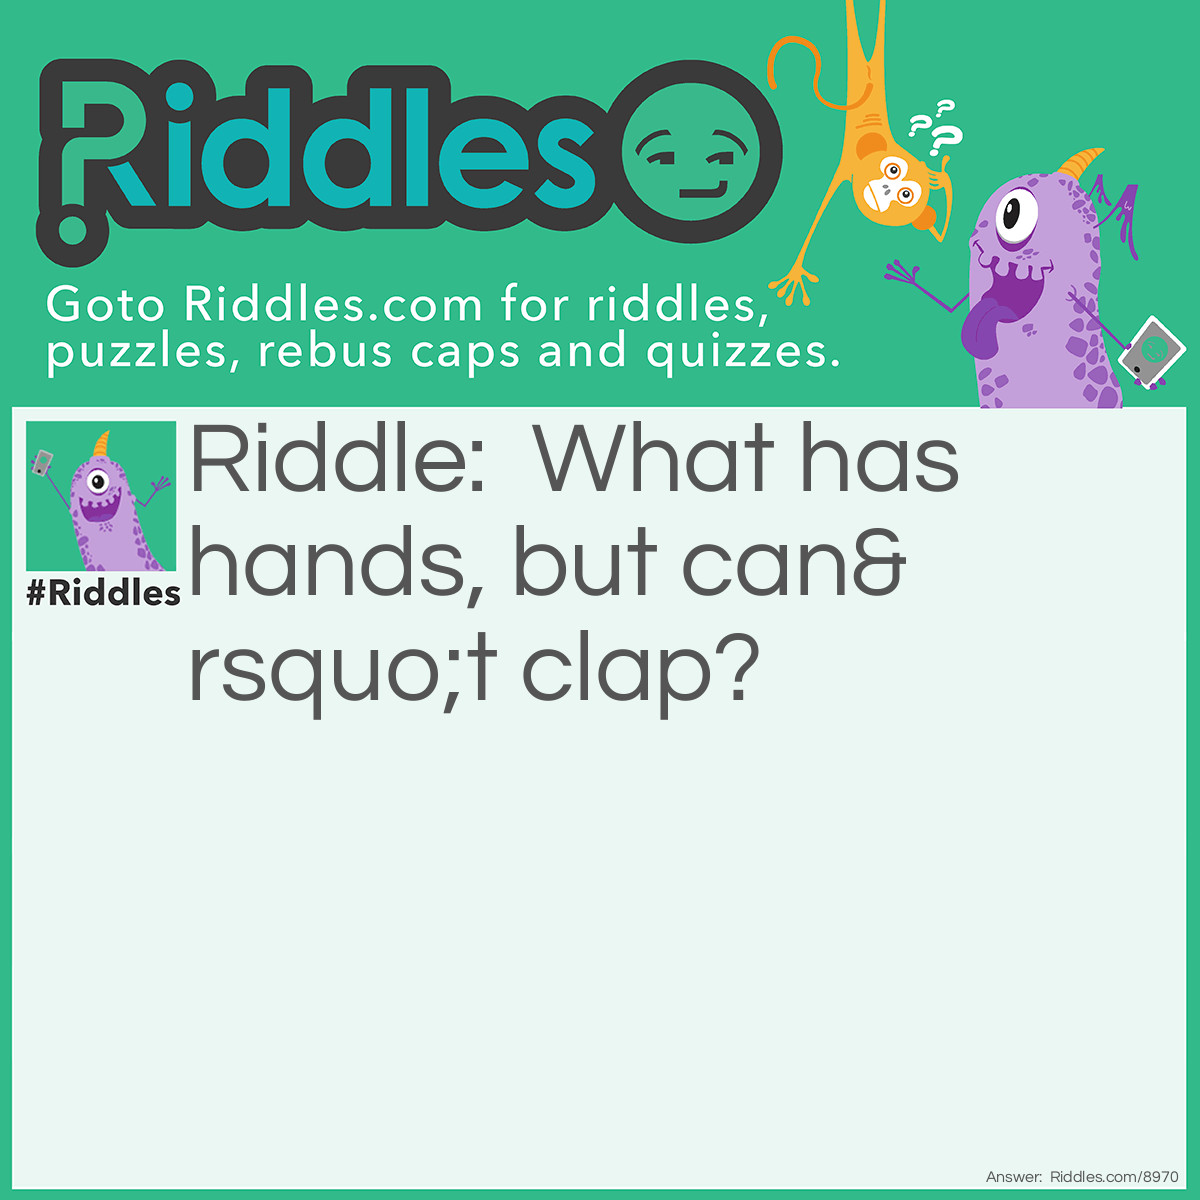 Riddle: What has hands, but can't clap? Answer: A clock.